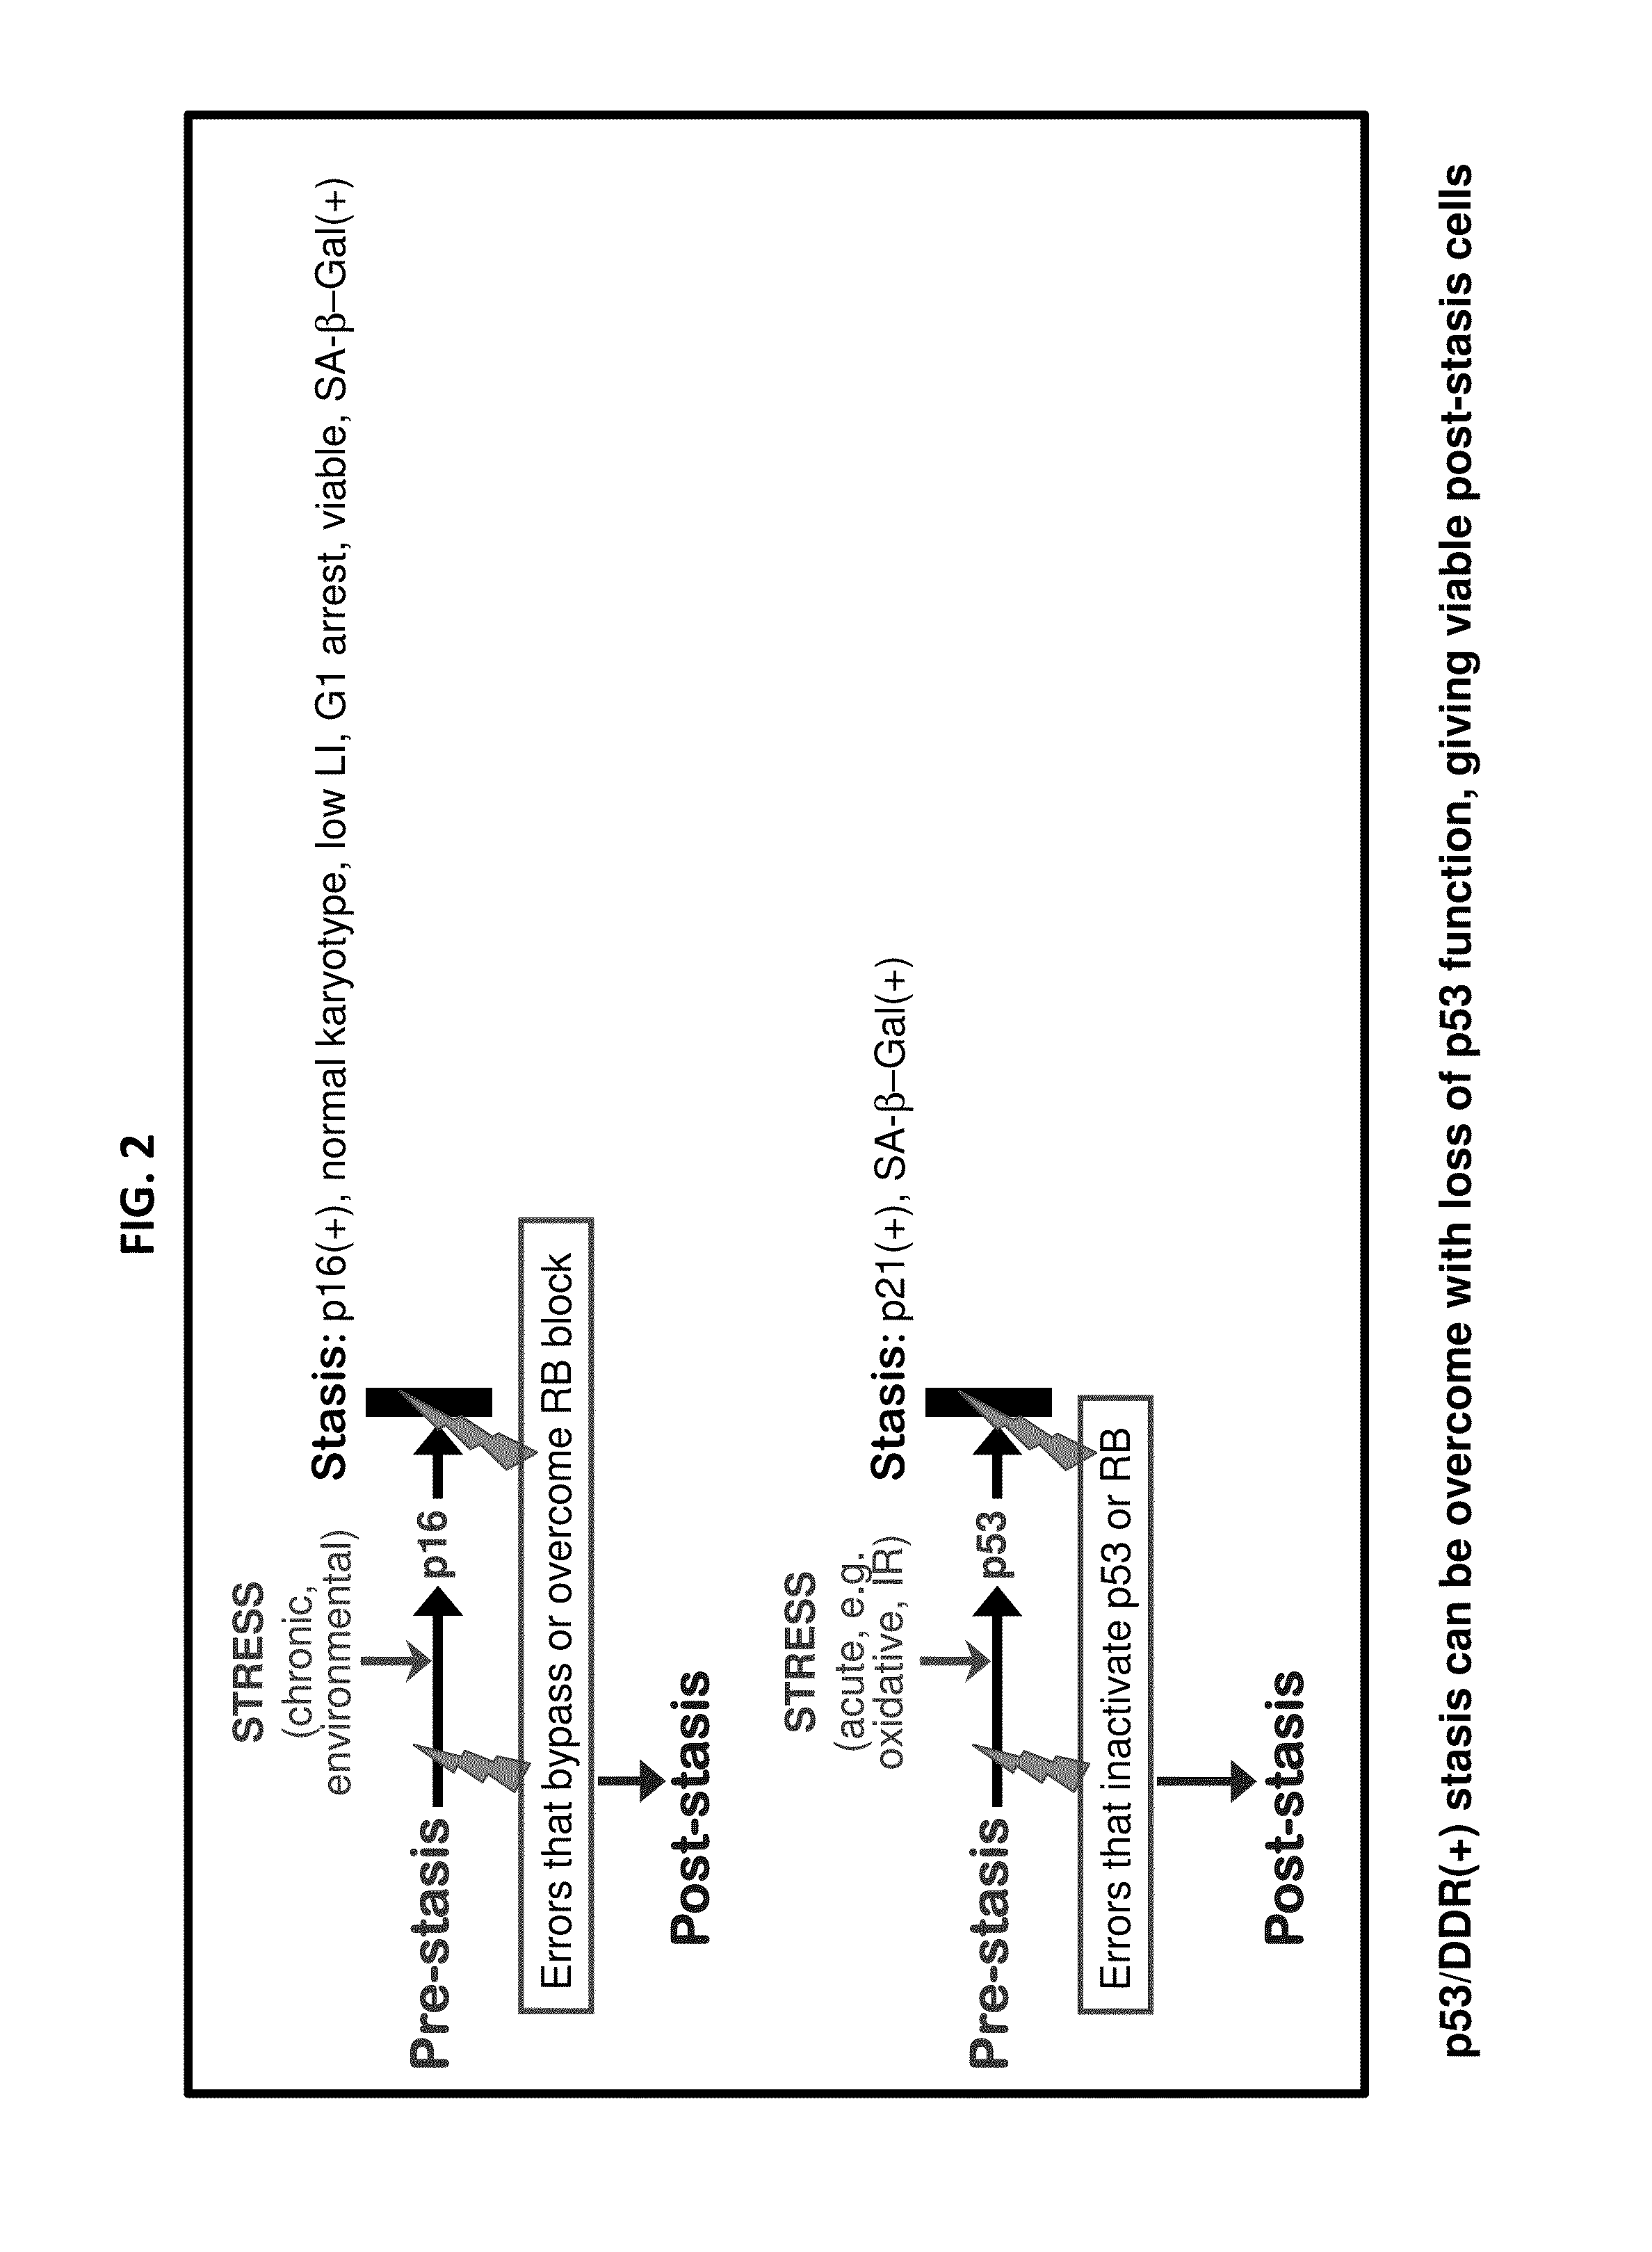 Methods for Efficient Immortalization Of Normal Human Cells